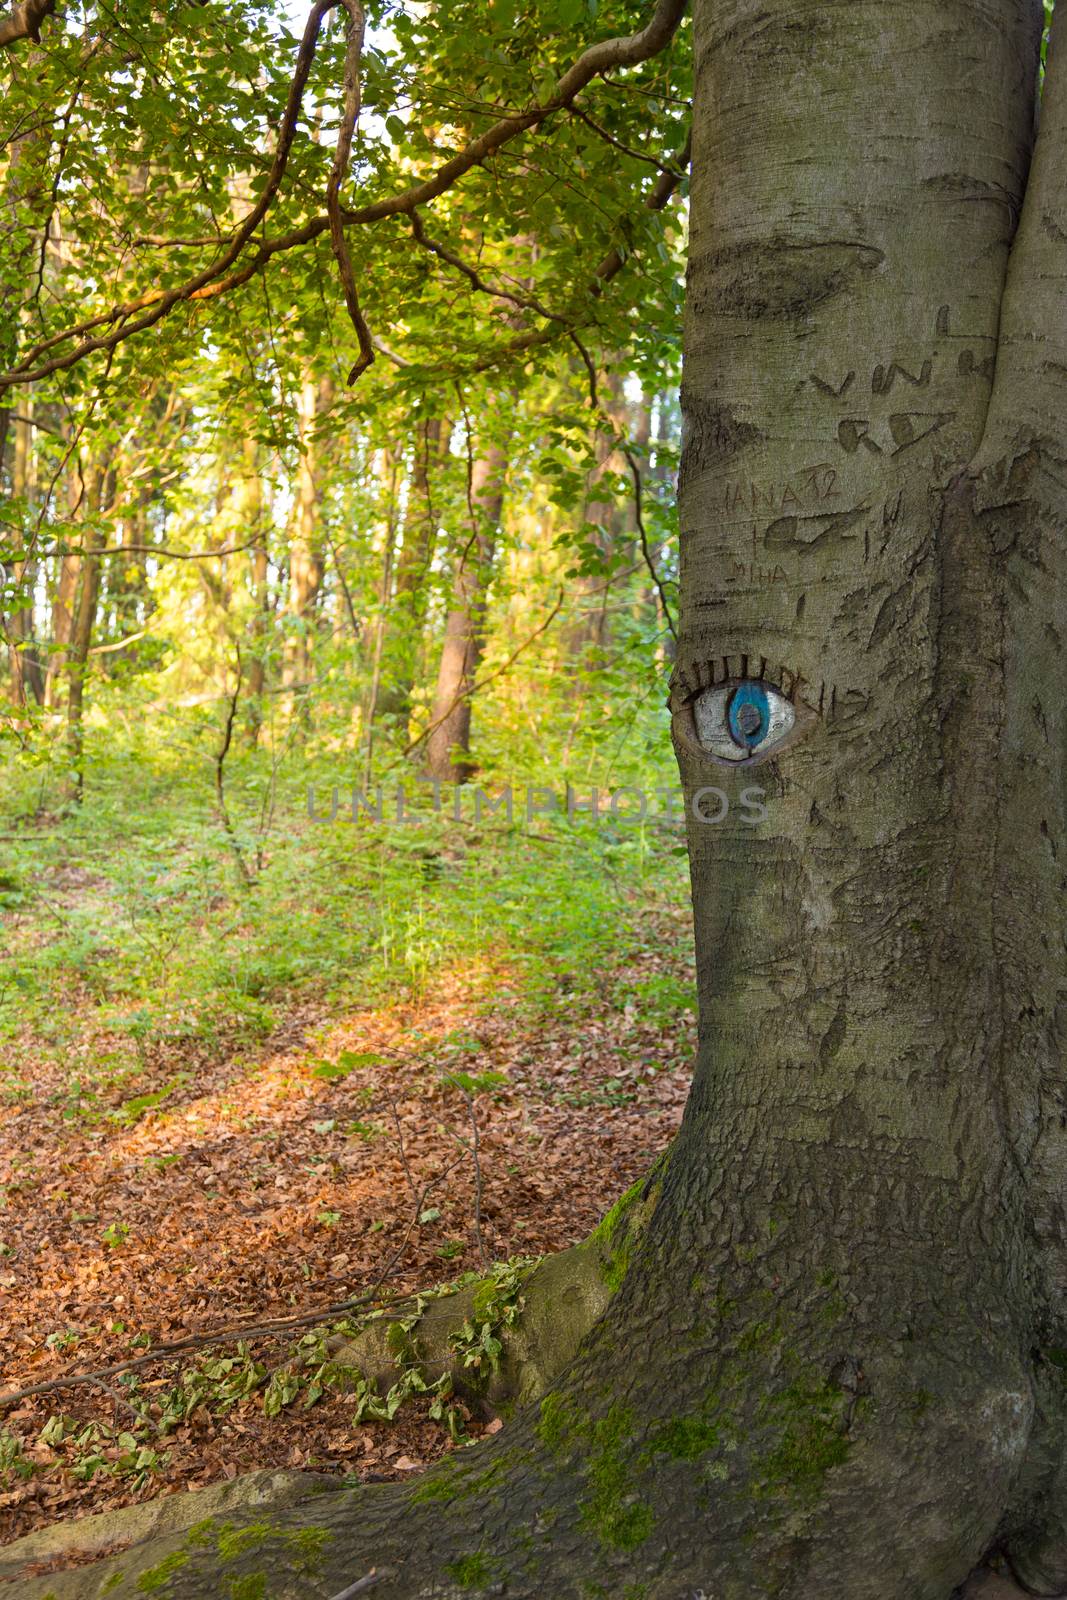 Eye carved in tree trunk in lush green forest.